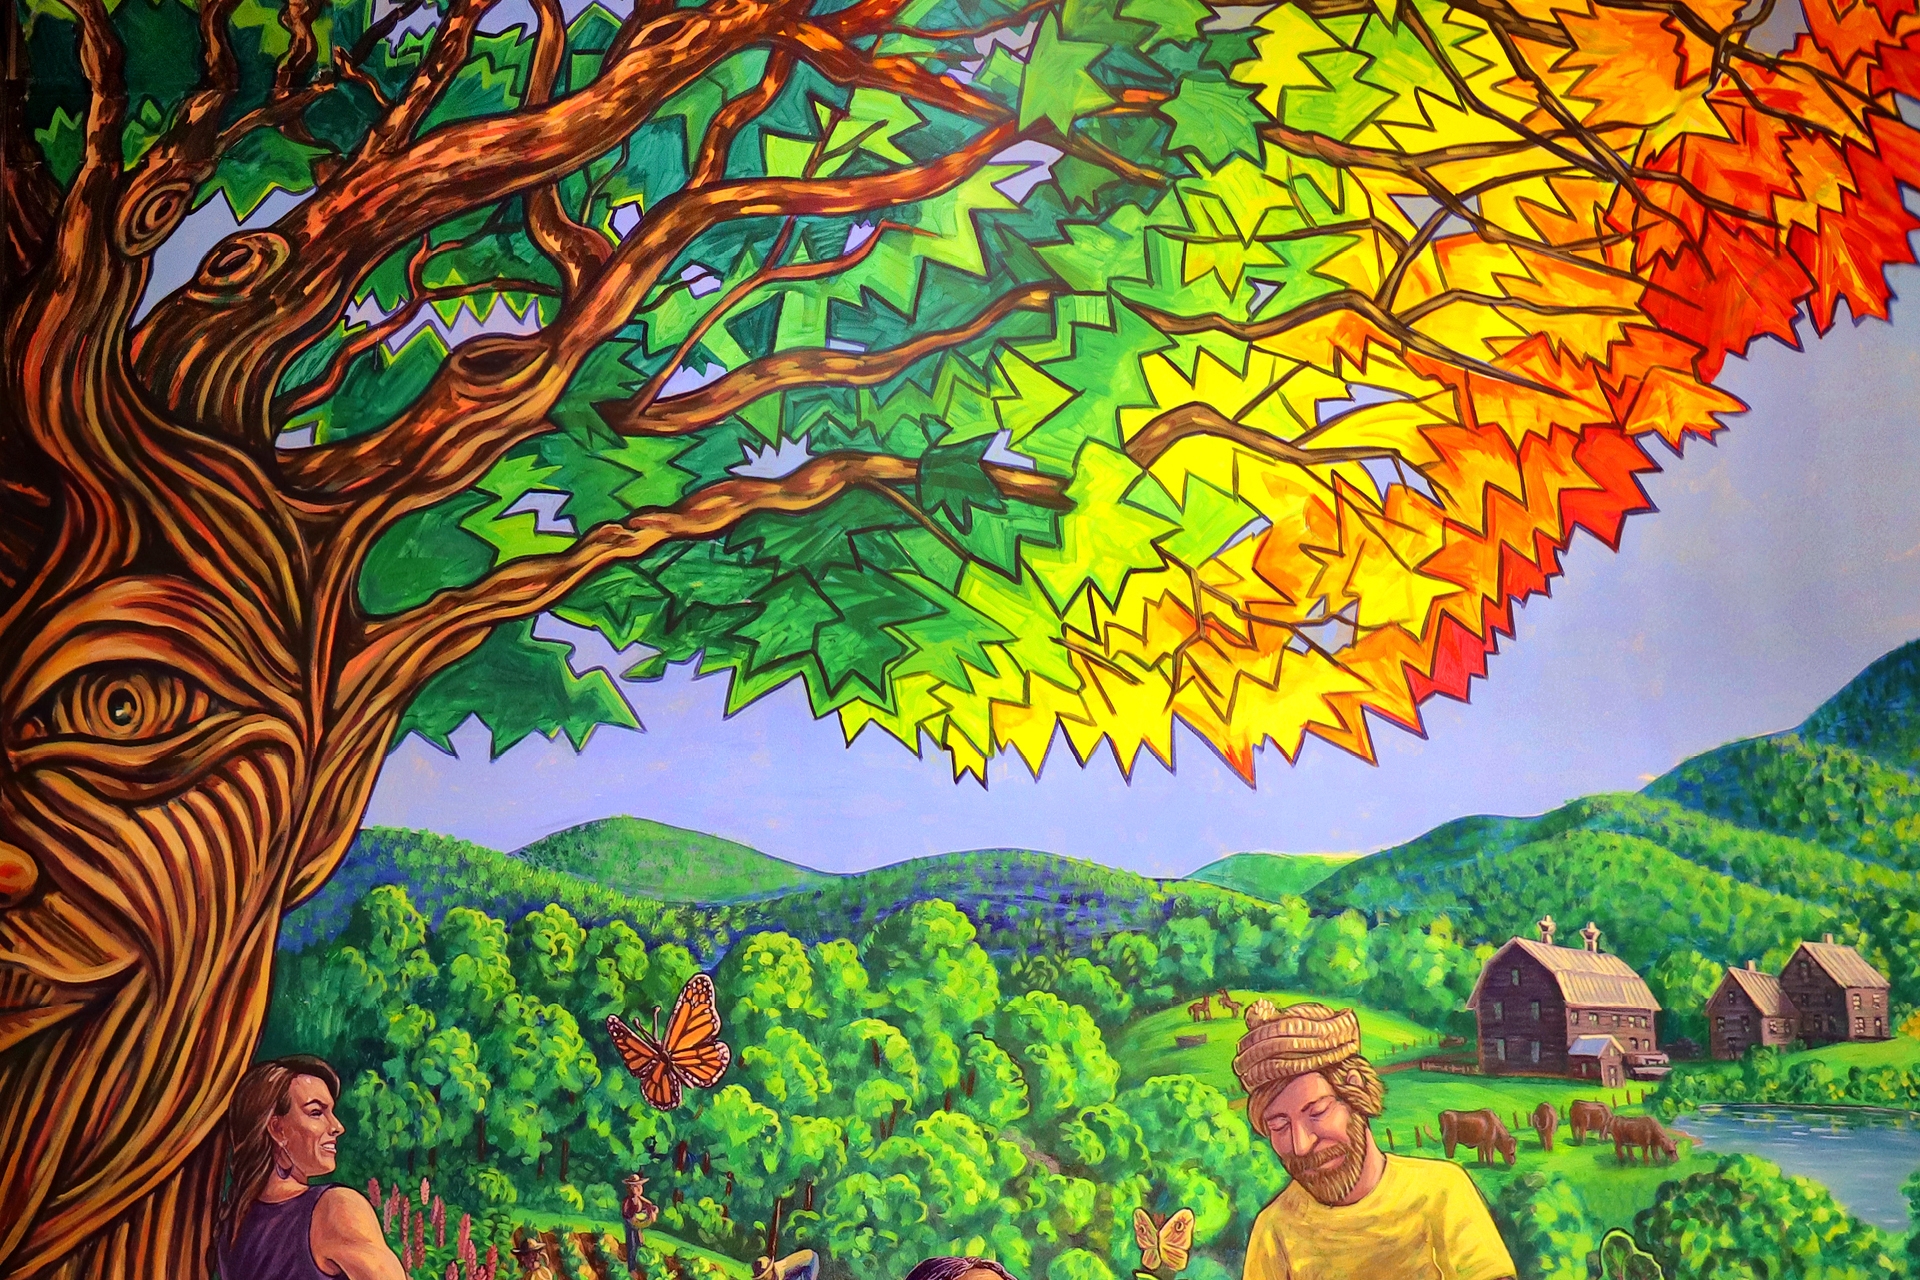 A painting with a tree in the foreground. The tree trunk forms a face. The leaves of the tree nearest the trunk are dark green, but become light green, then yellow, then orange, then red as they get further from the trunk. The leaves are angular. Behind the tree, a forest fades into low green rolling mountains. In front of the mountains, there is a man with a light brown beard wearing a yellow shirt.